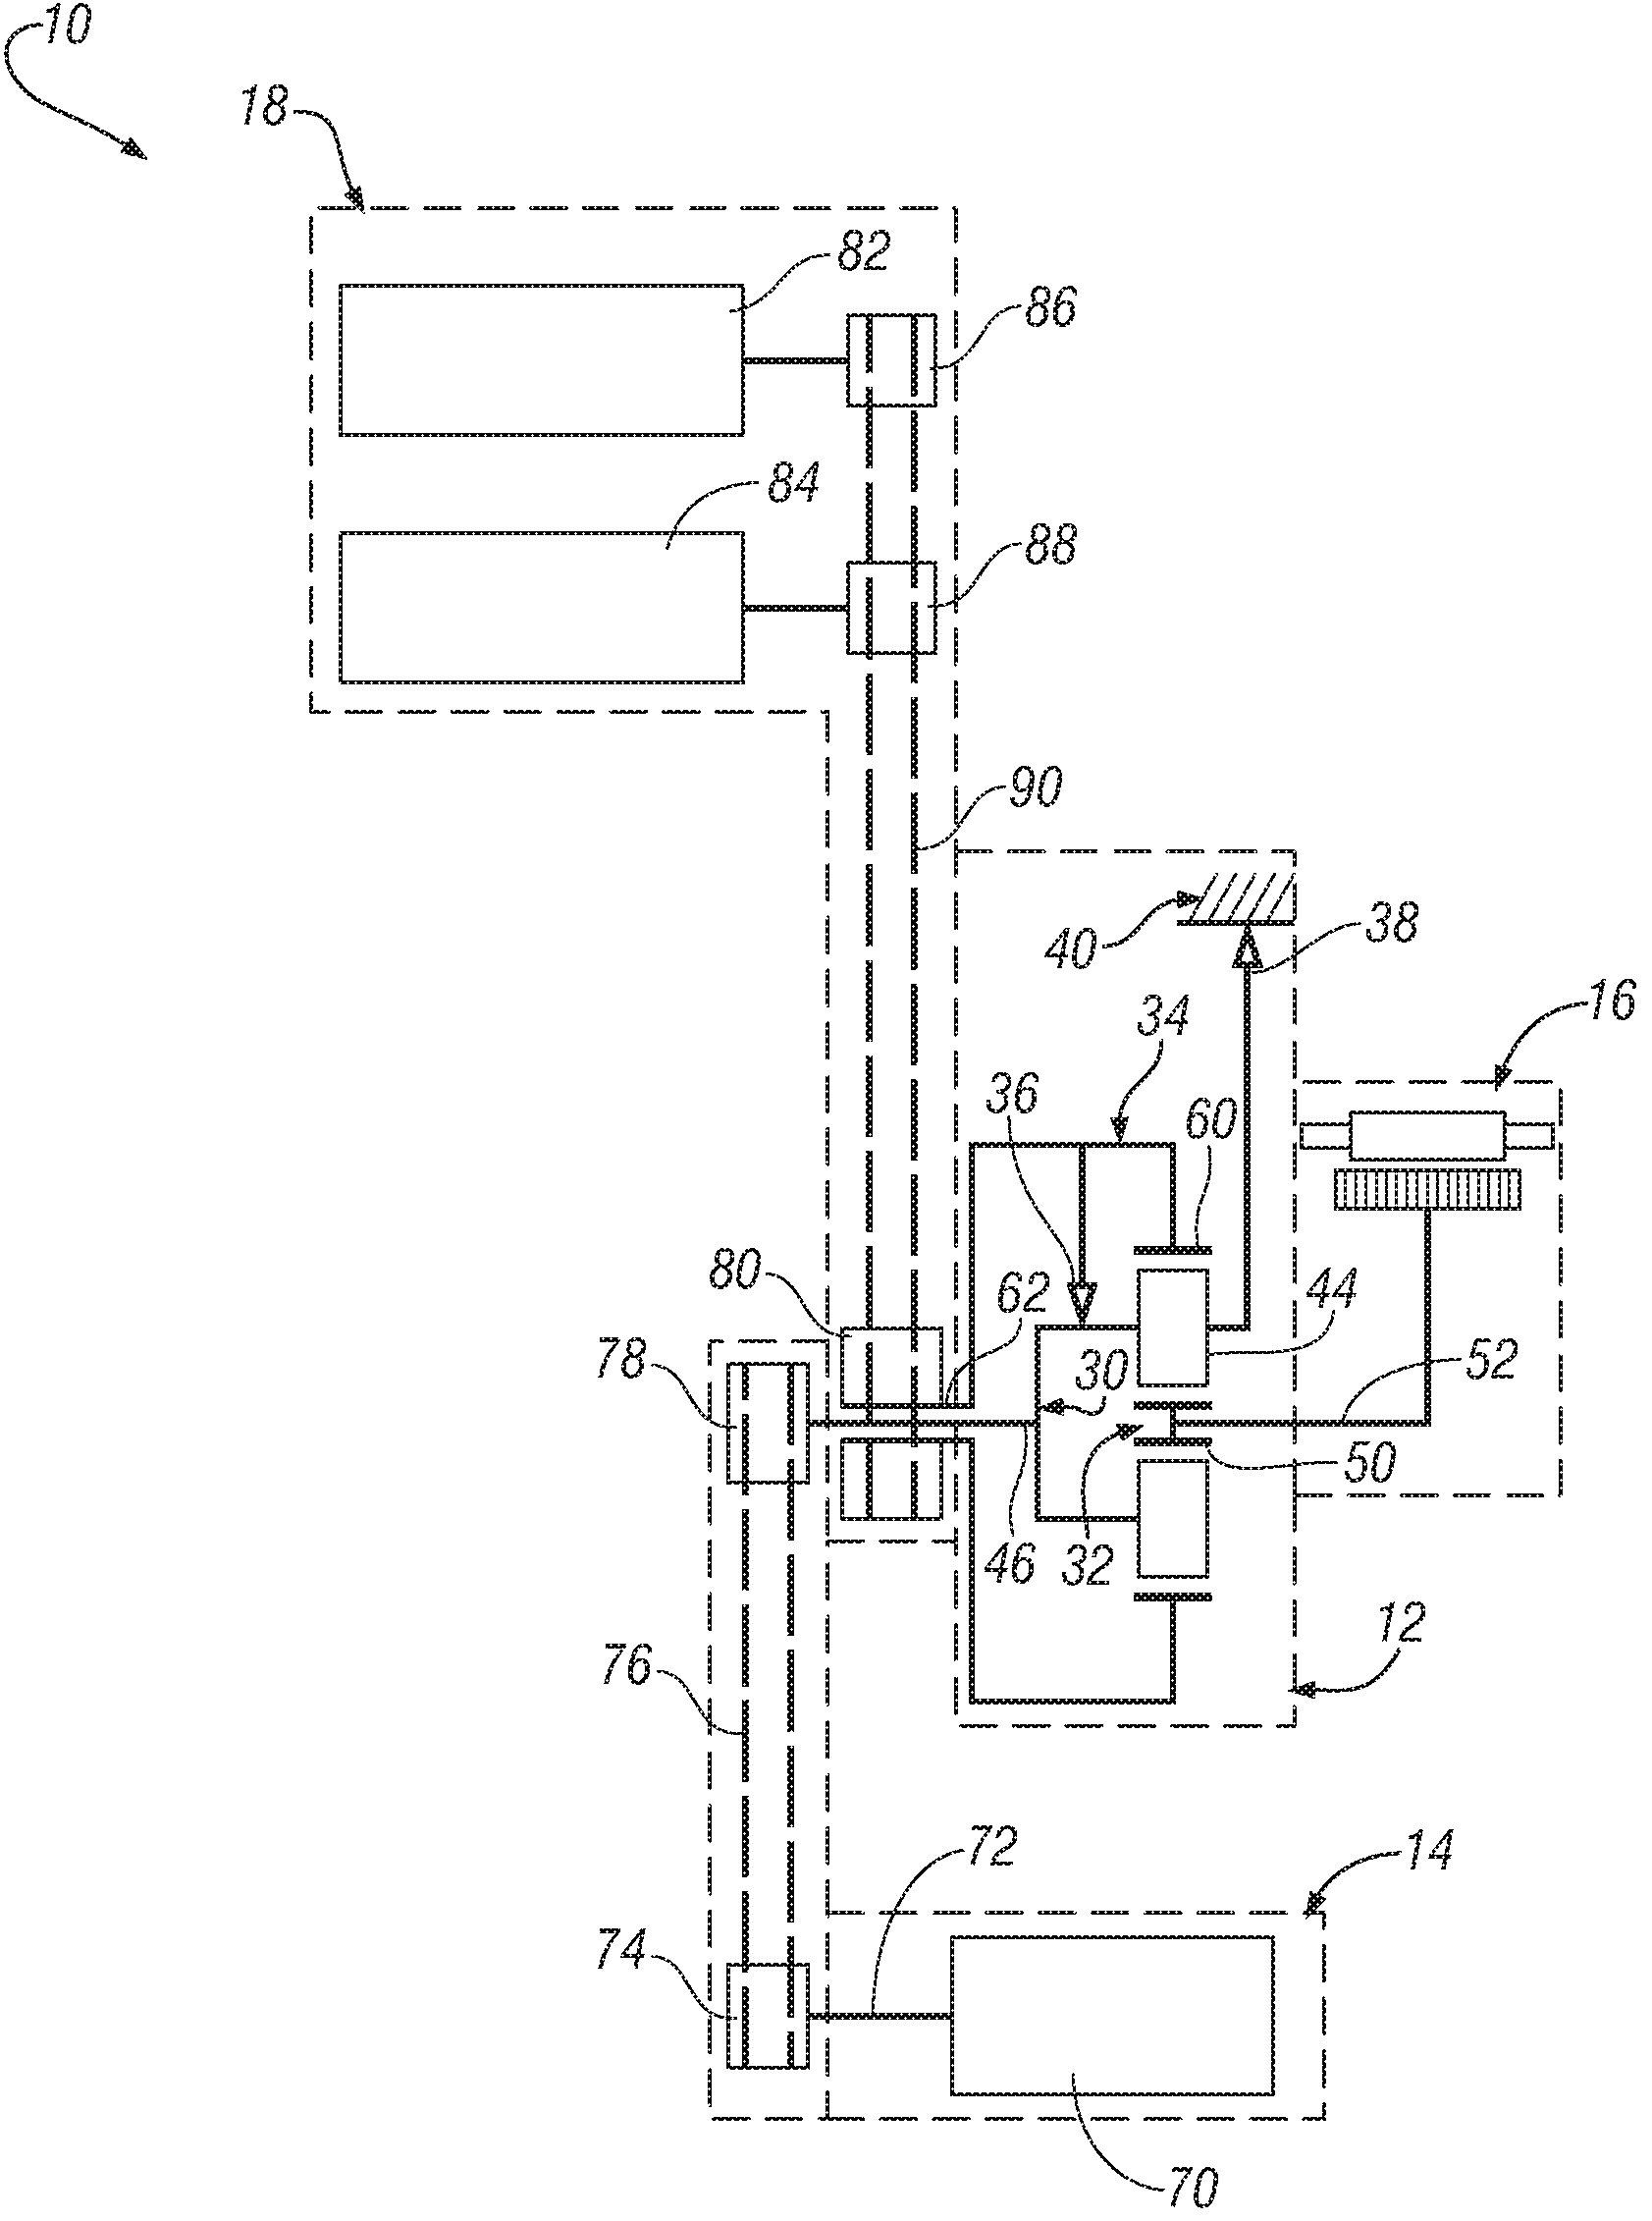 Vehicle drive system, power management device, and method for managing power